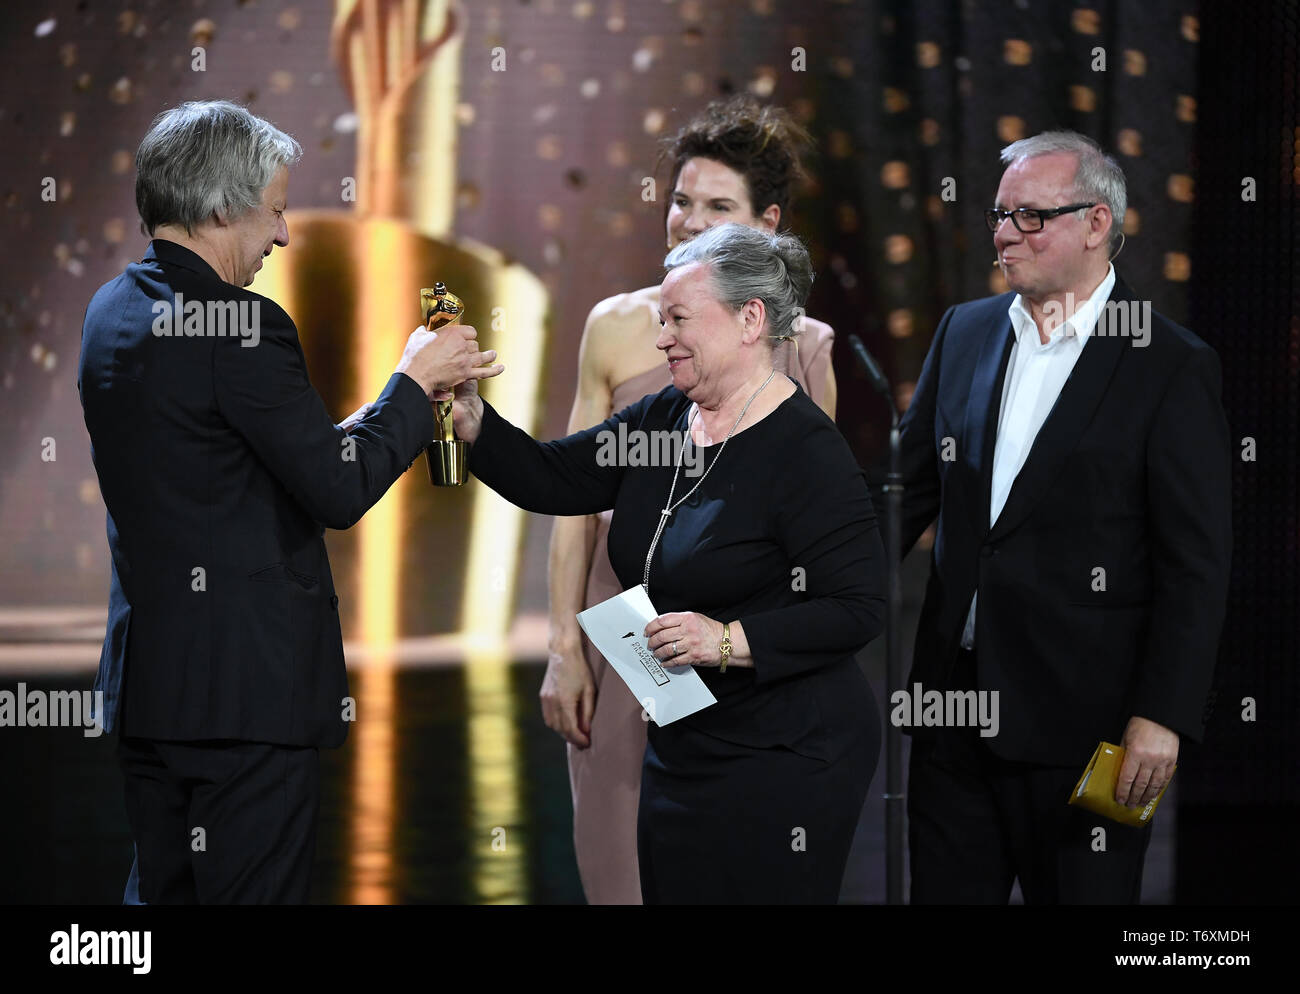 Berlin, Germany. 03rd May, 2019. Director Andreas Dresen (l, film 'Gundermann') receives the award in the category 'Best Director' from Ursula Werner (2nd from left) at the 69th German Film Award 'Lola'. Behind him are Bibiana Beglau and Joachim Krol (r). Credit: Britta Pedersen/dpa-Zentralbild/dpa/Alamy Live News Stock Photo